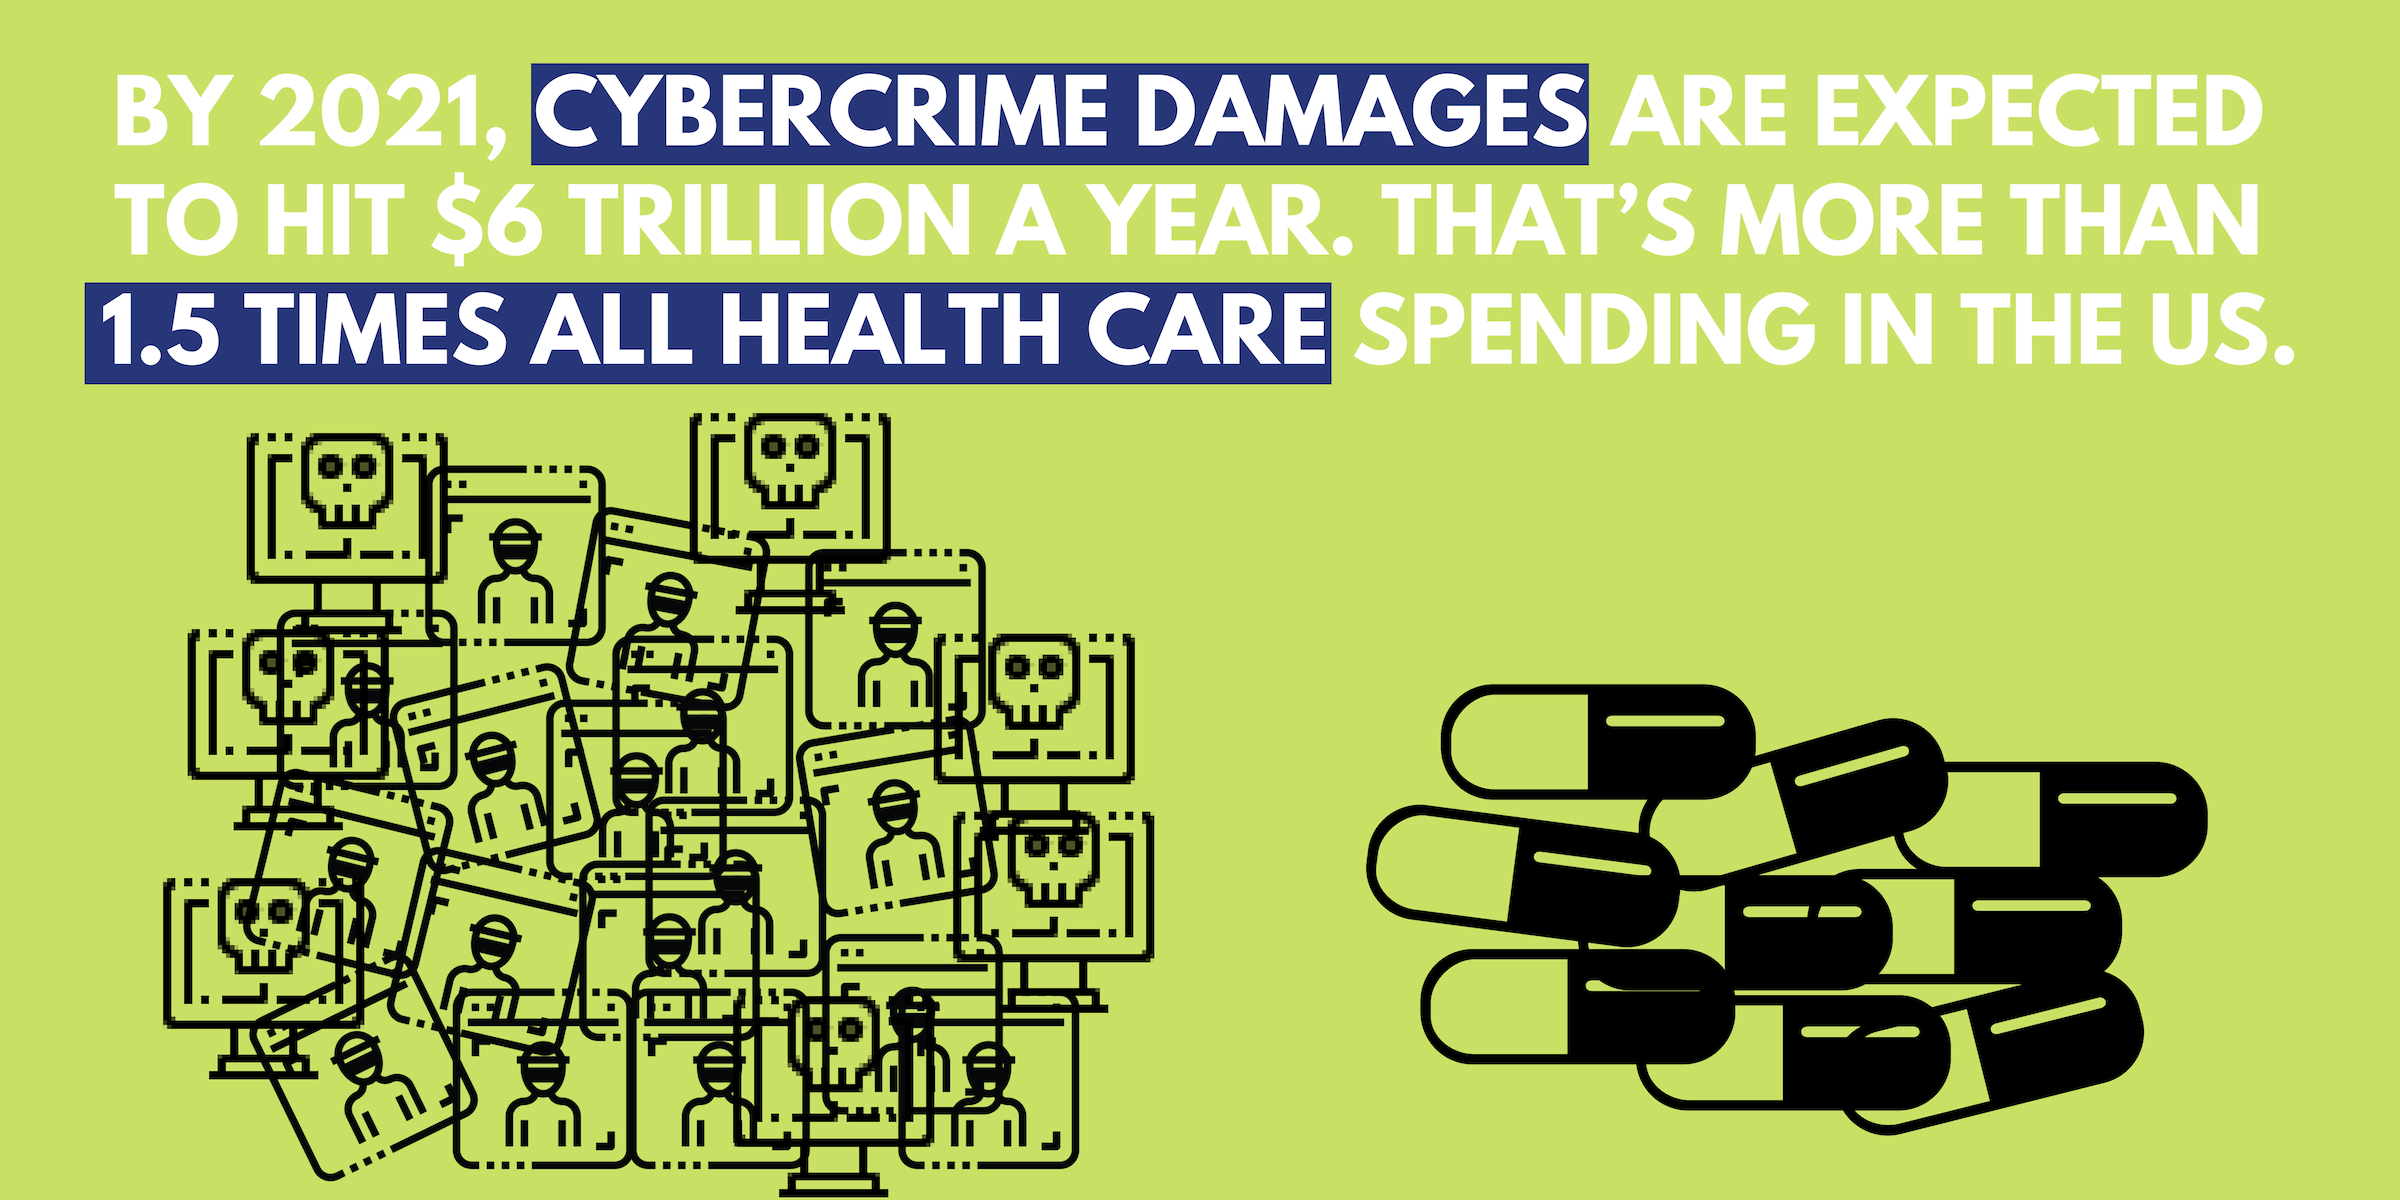 By 2021, Cybercrime damages are expected to hit $6 trillion a year. That's more than 1.5 times all health care spending in the US.